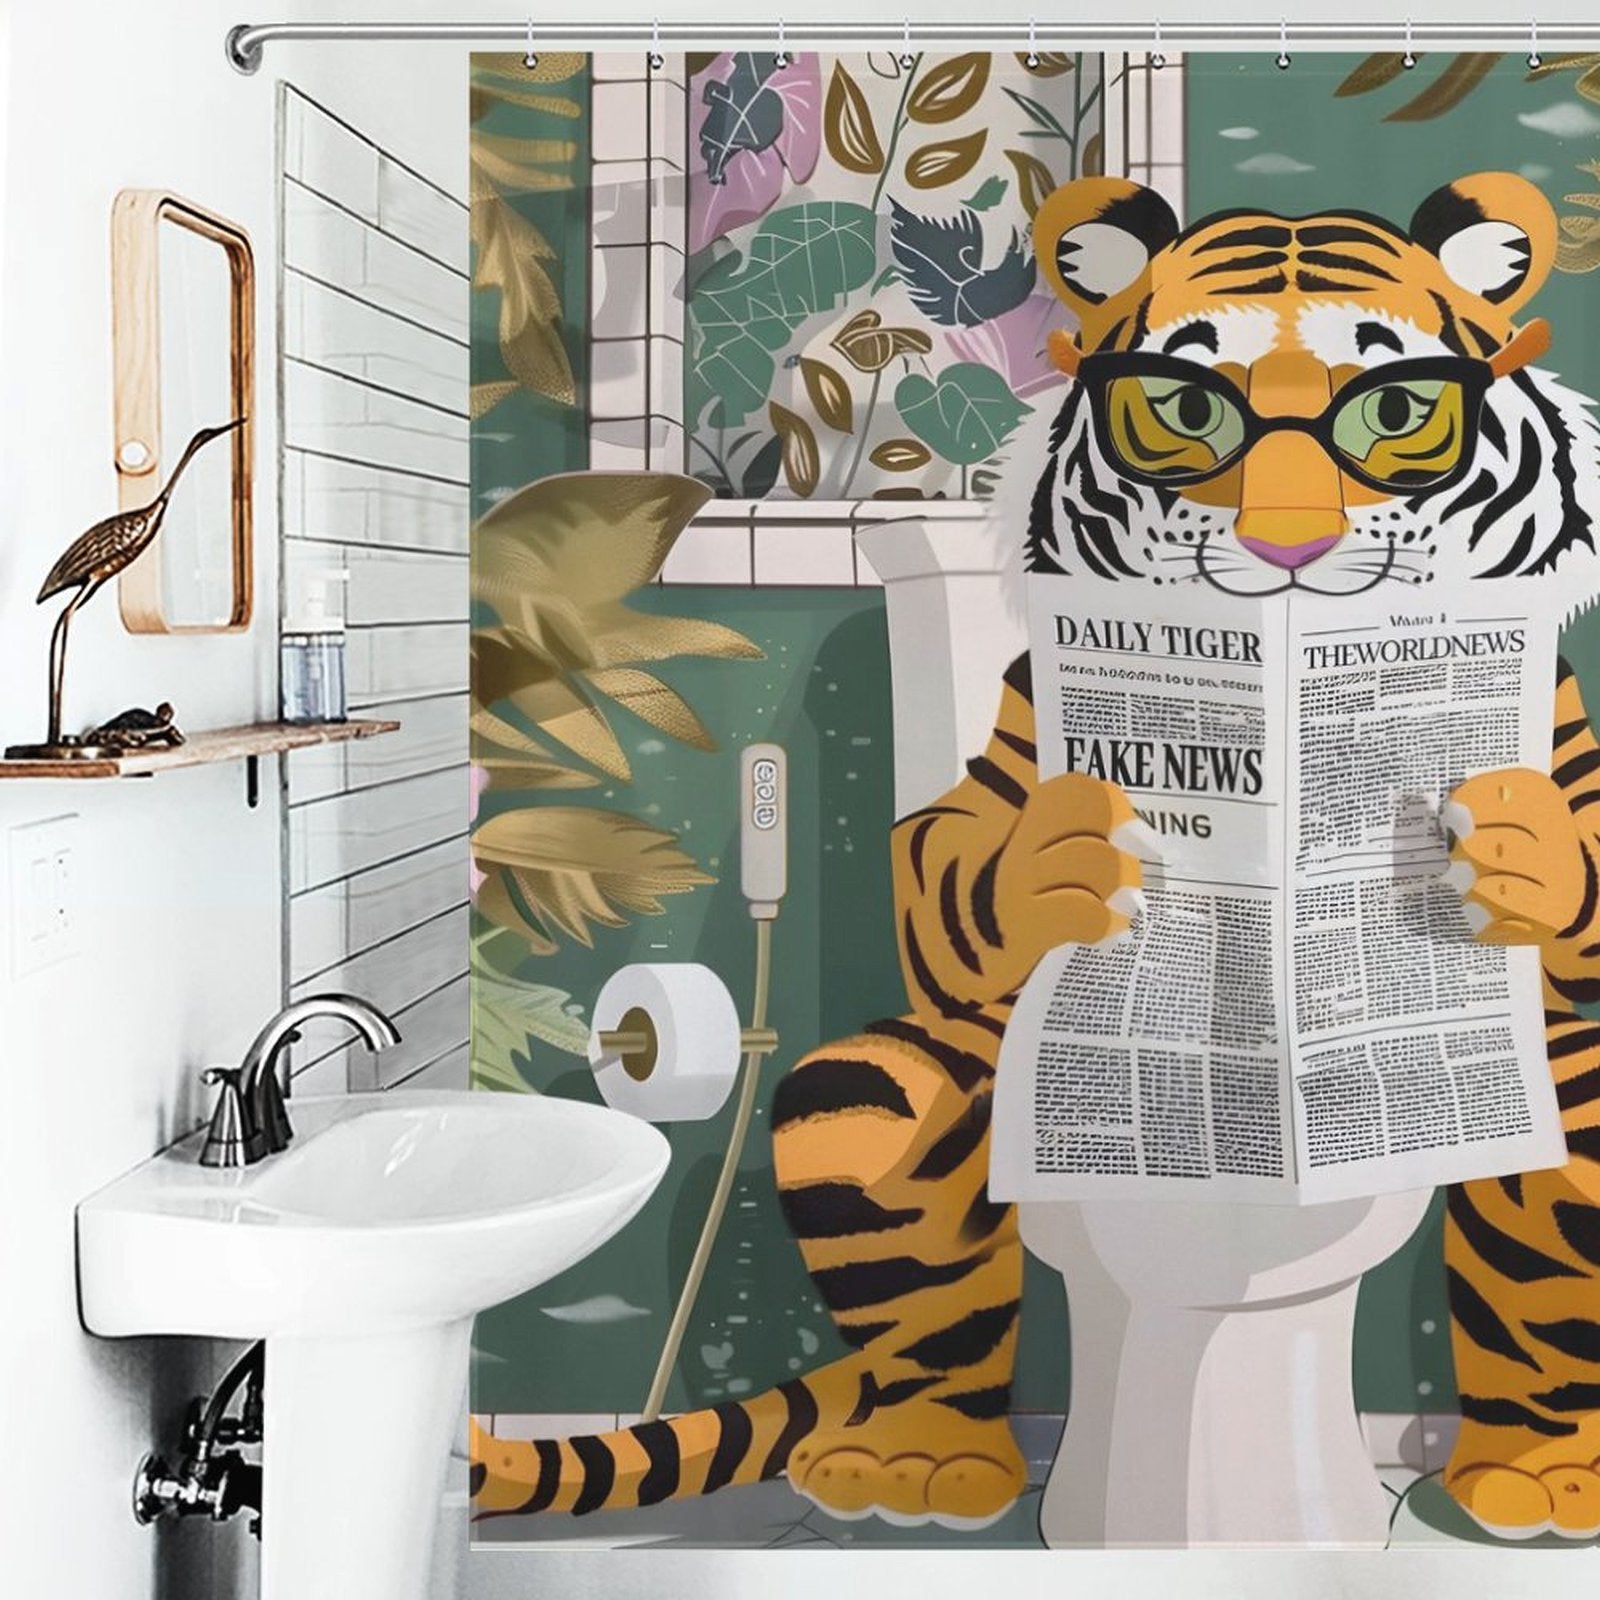 A bathroom with a unique shower curtain depicting a tiger wearing glasses, sitting on a toilet and reading a newspaper labeled "FAKE NEWS." This Funny Cool Tiger Reading Shower Curtain-Cottoncat by Cotton Cat adds quirky charm to the decor, while a sink with a mirror is visible to the left.